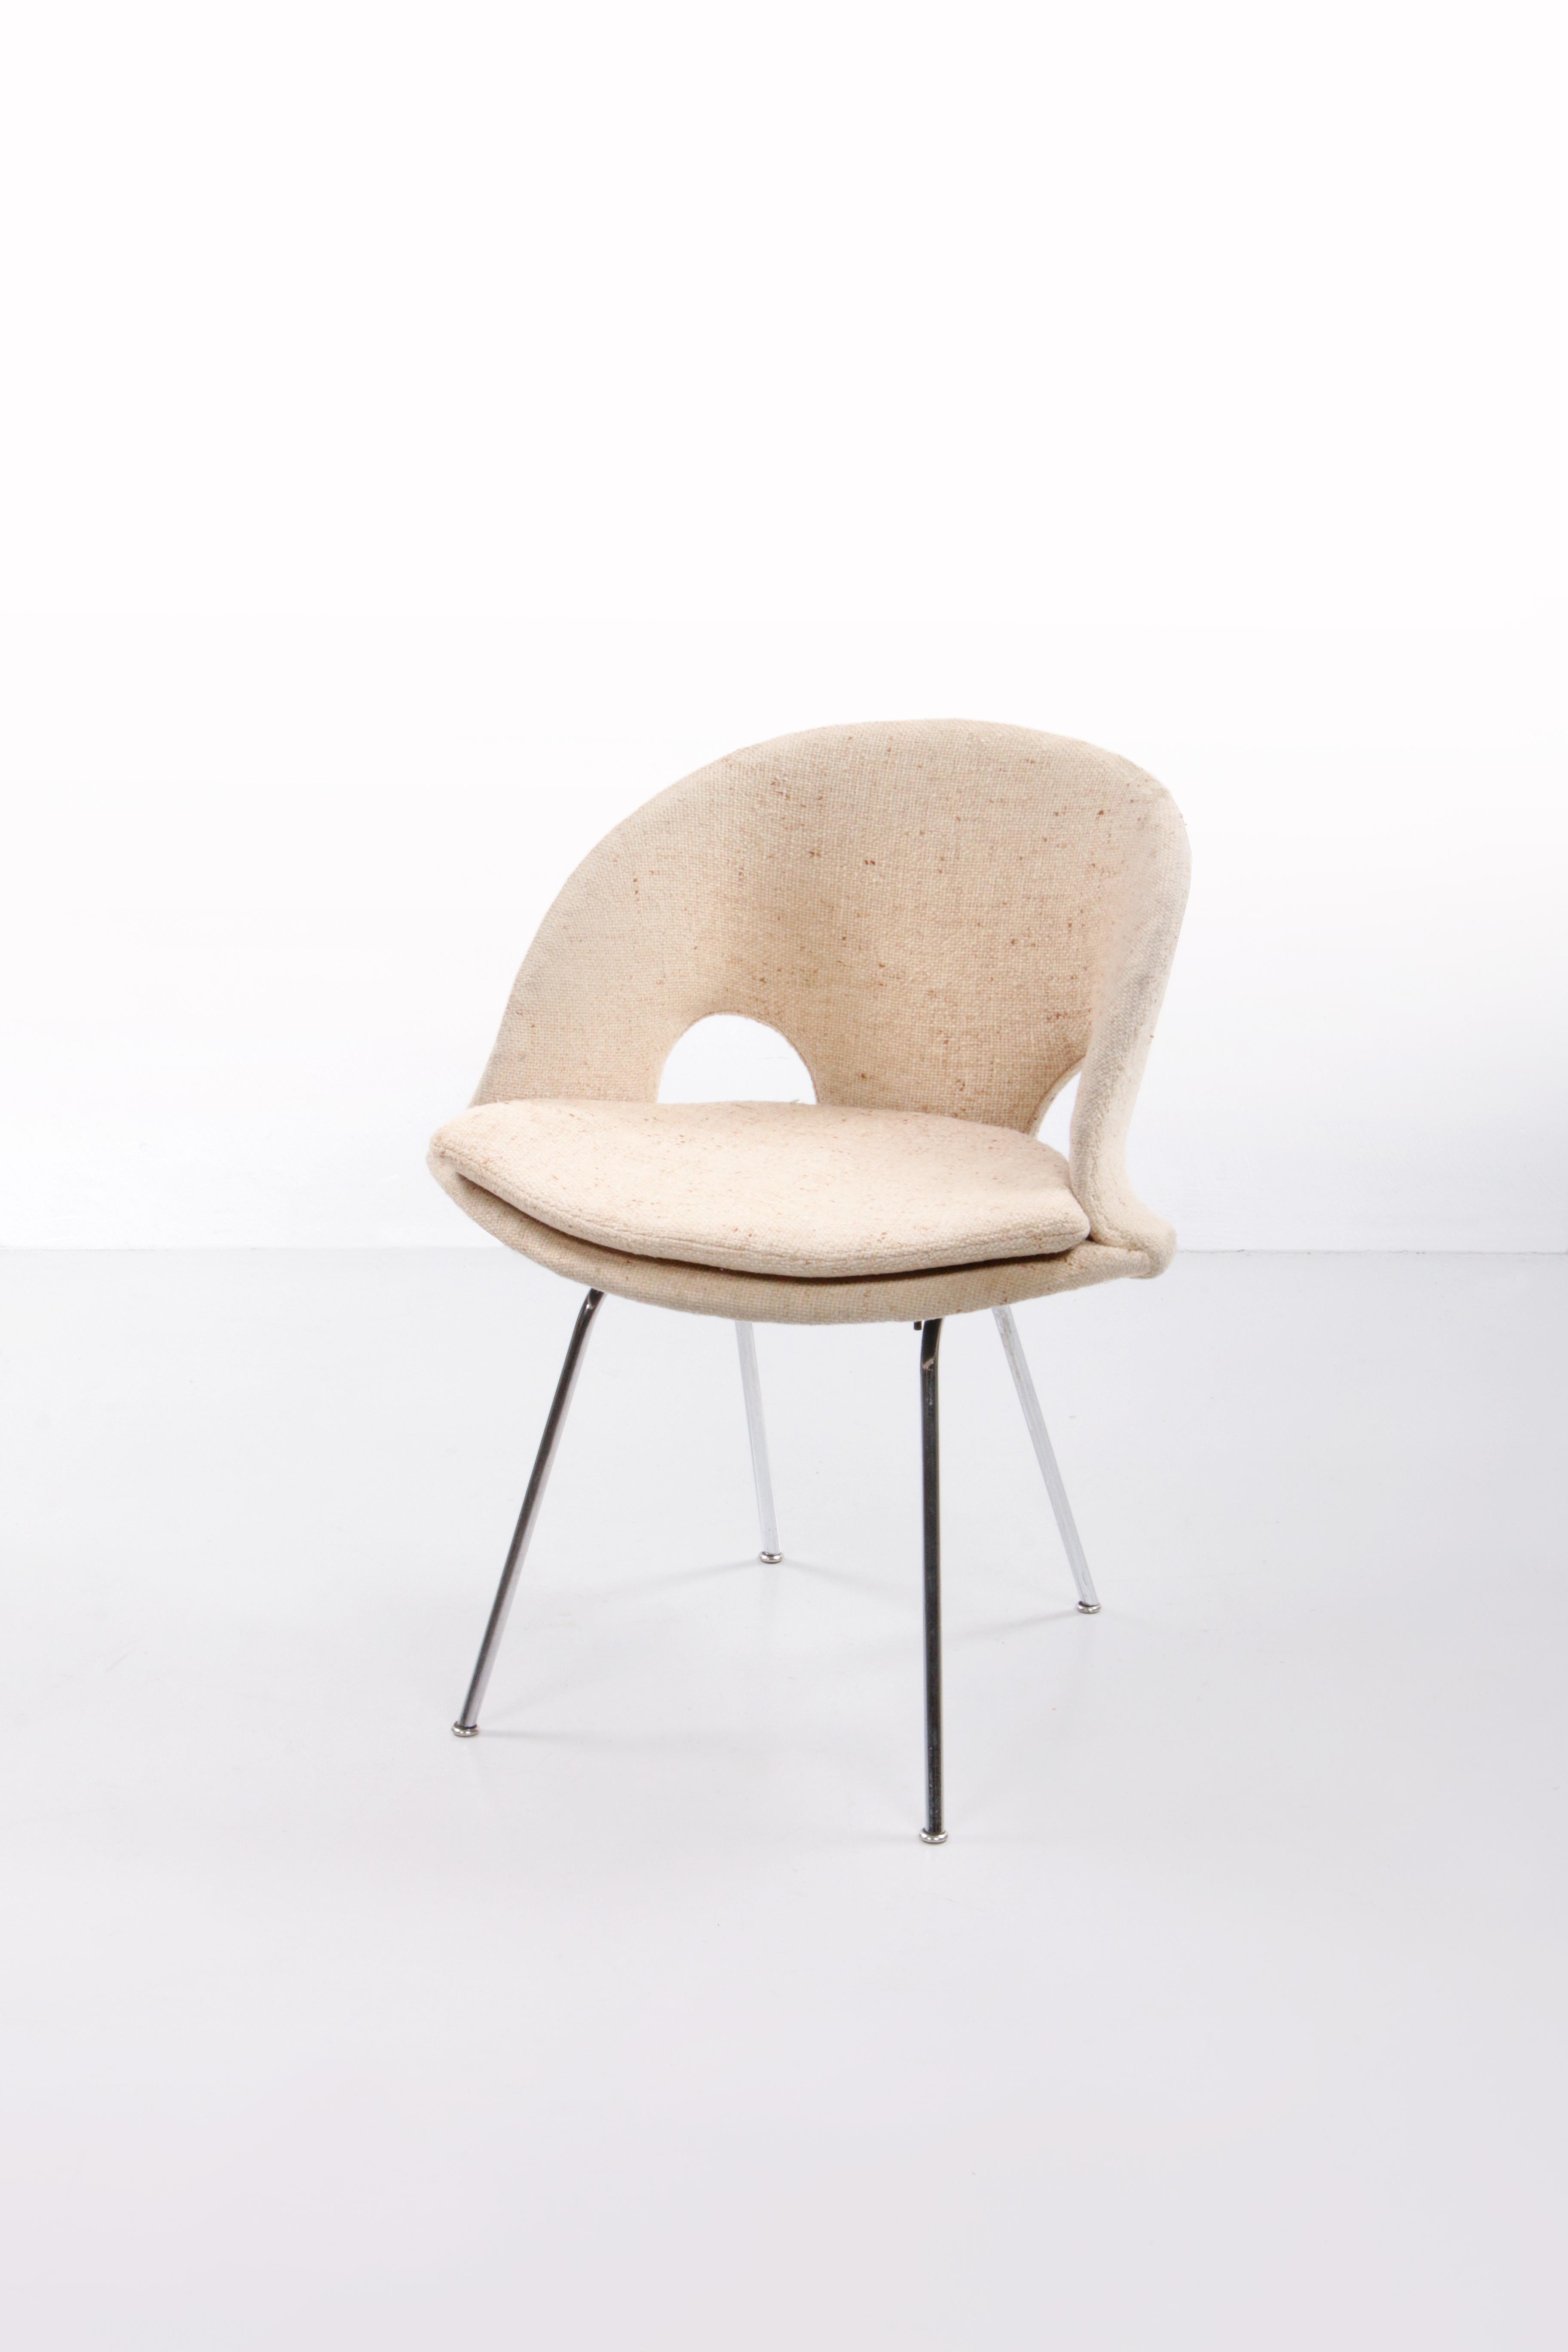 Walter Knoll Lounge Chair by Arno Votteler Model 350, 1950s For Sale 4